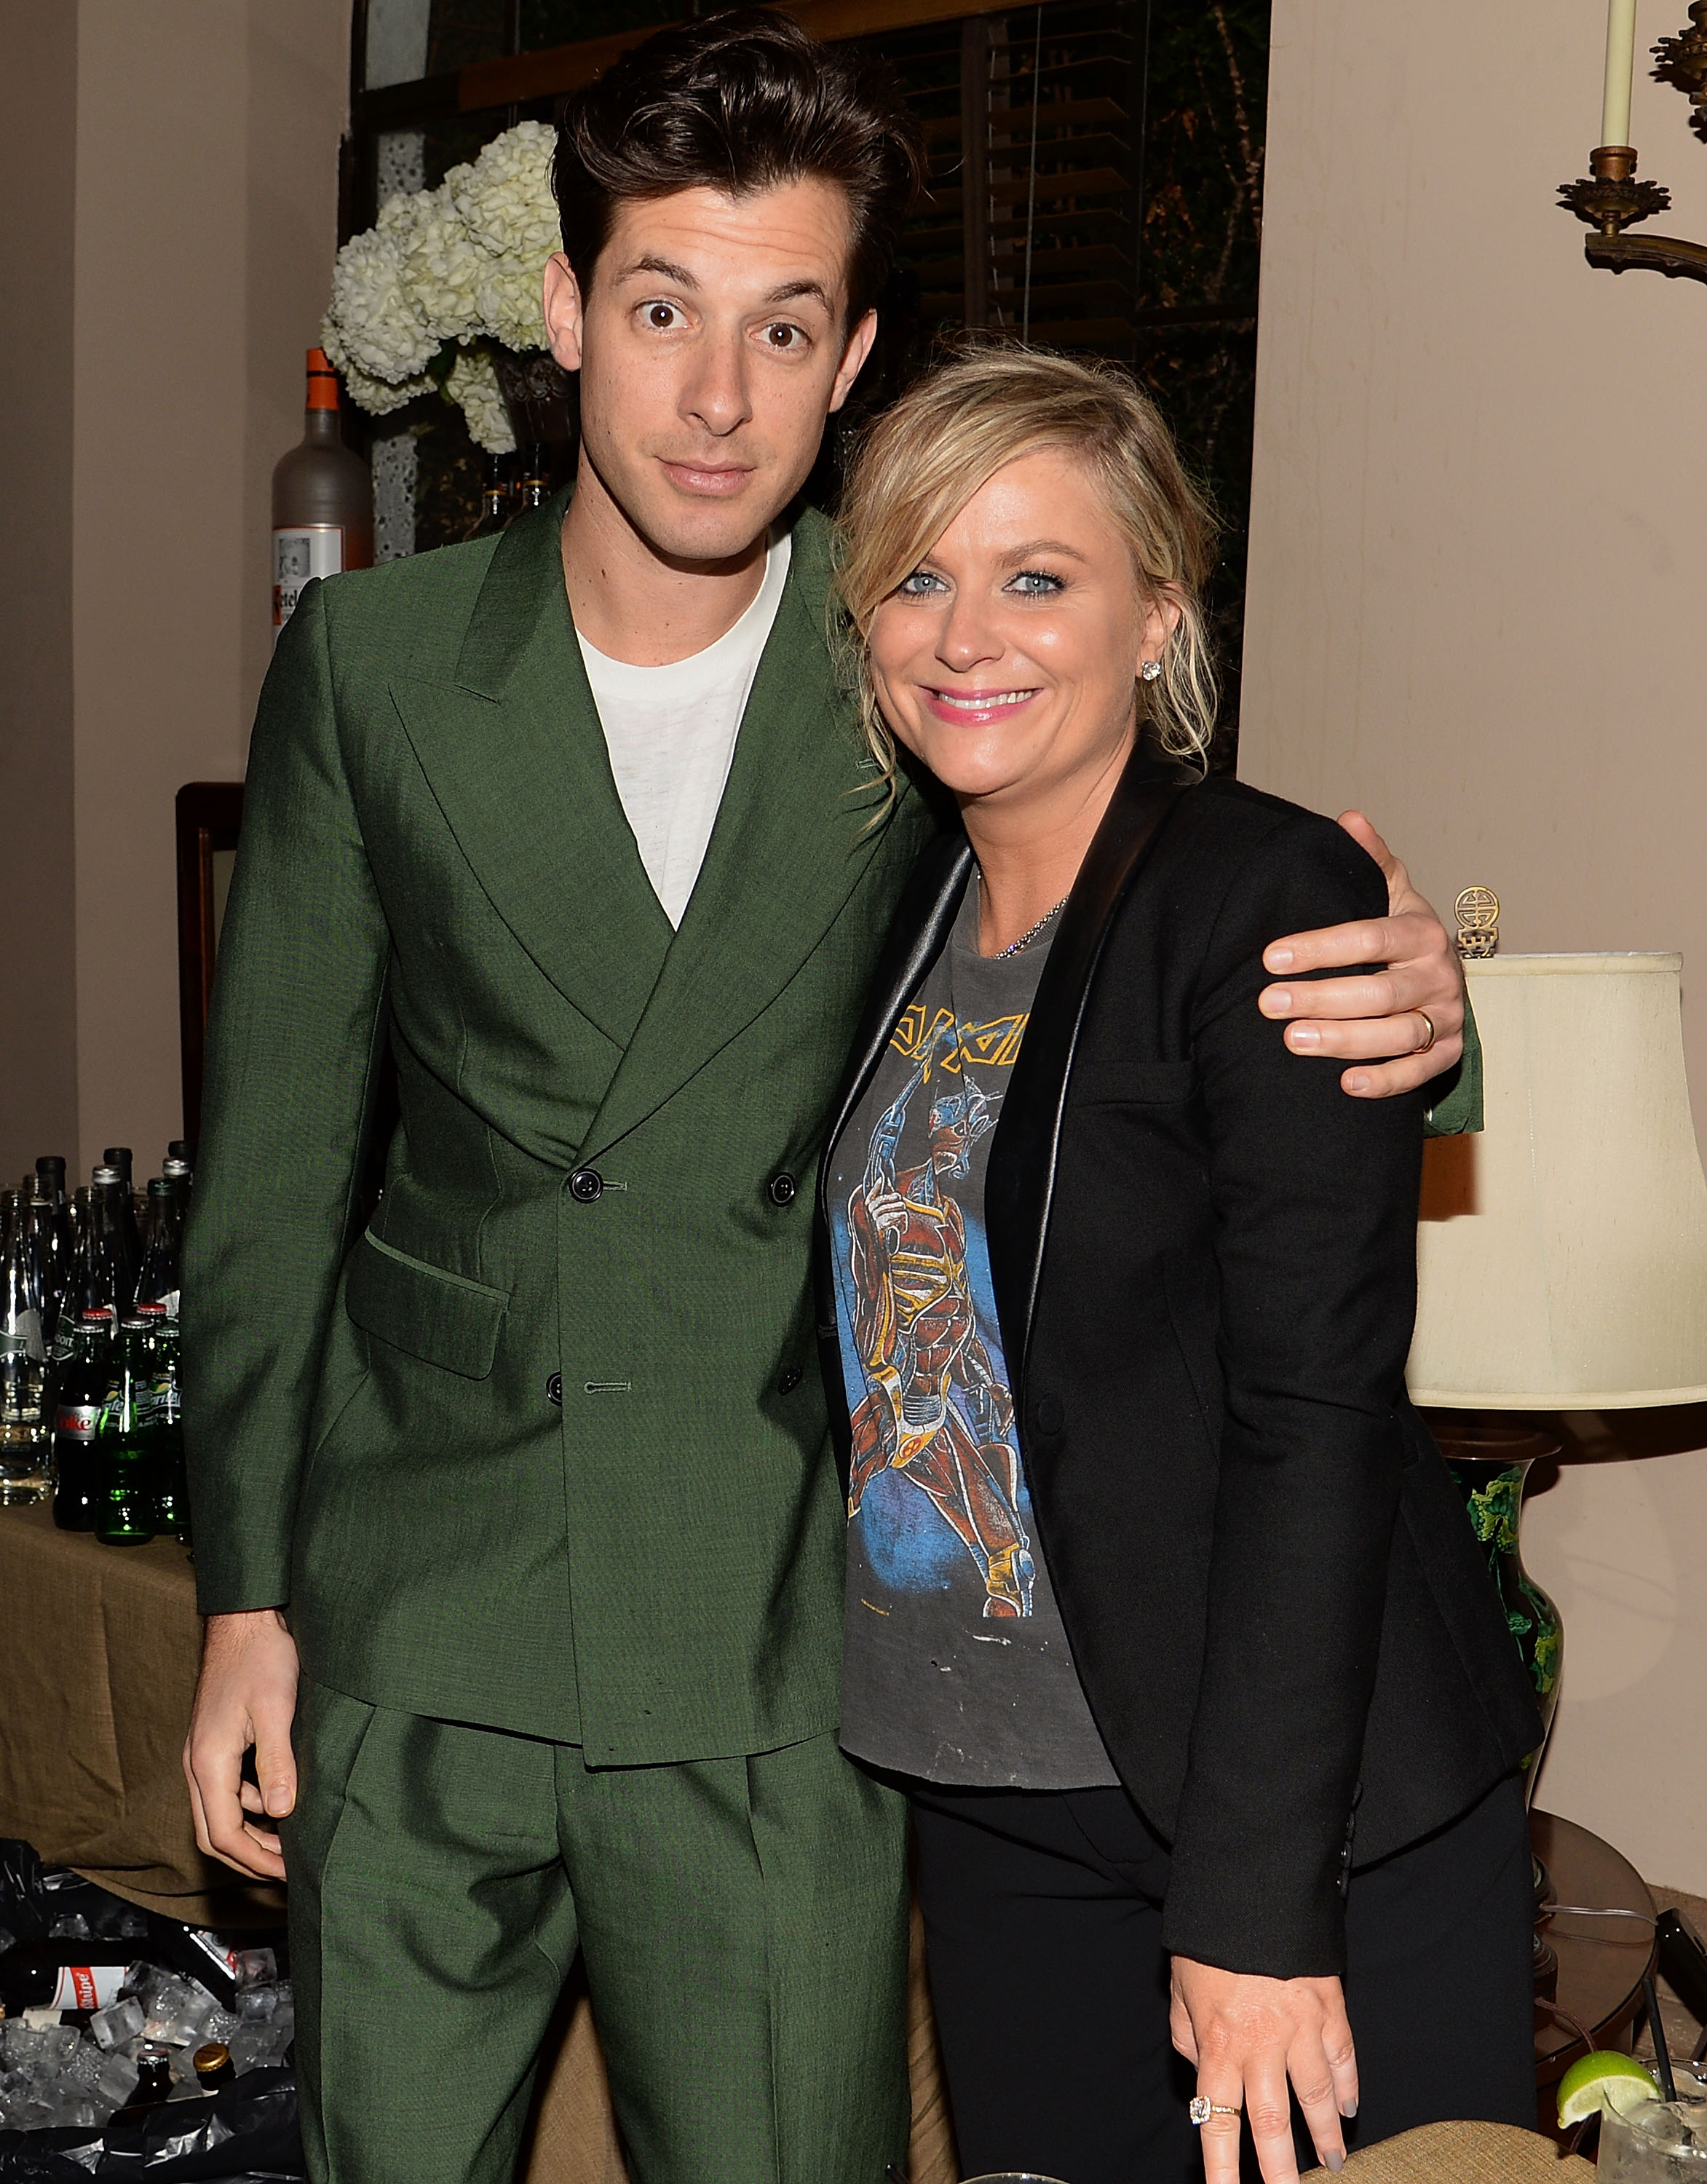 Music recording artist Mark Ronson and actress Amy Poehler